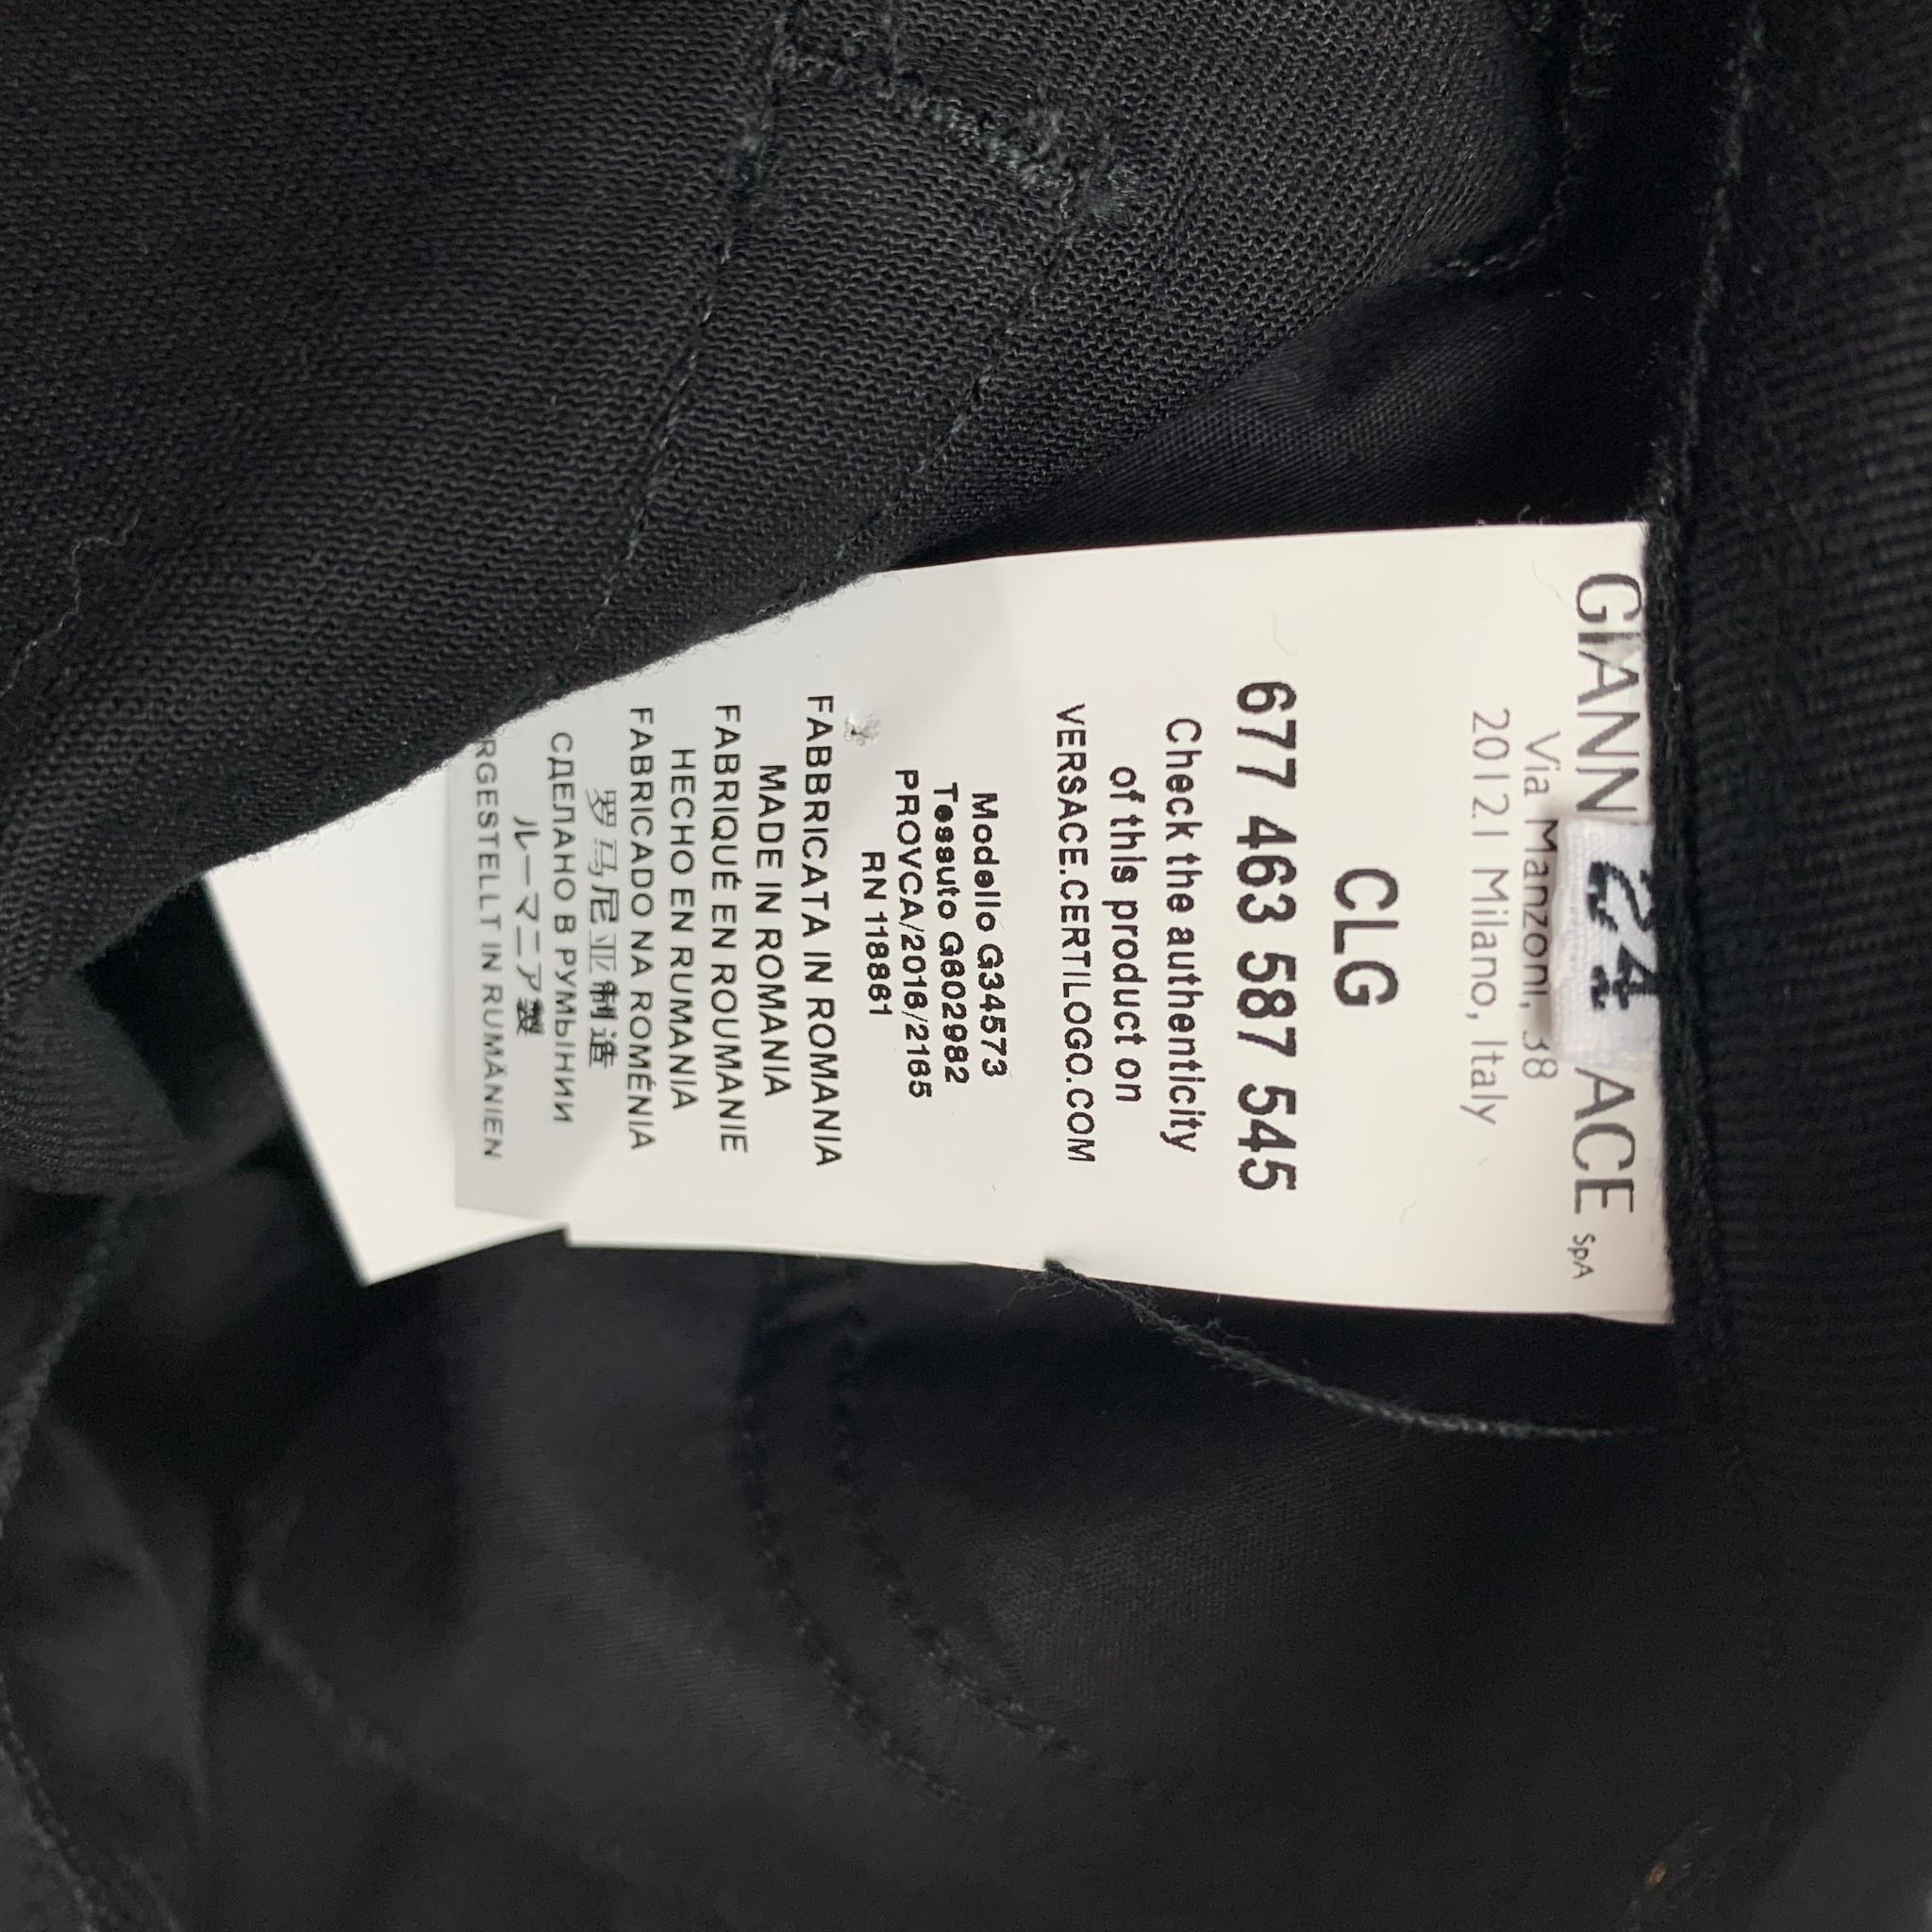 size 24 pants in us